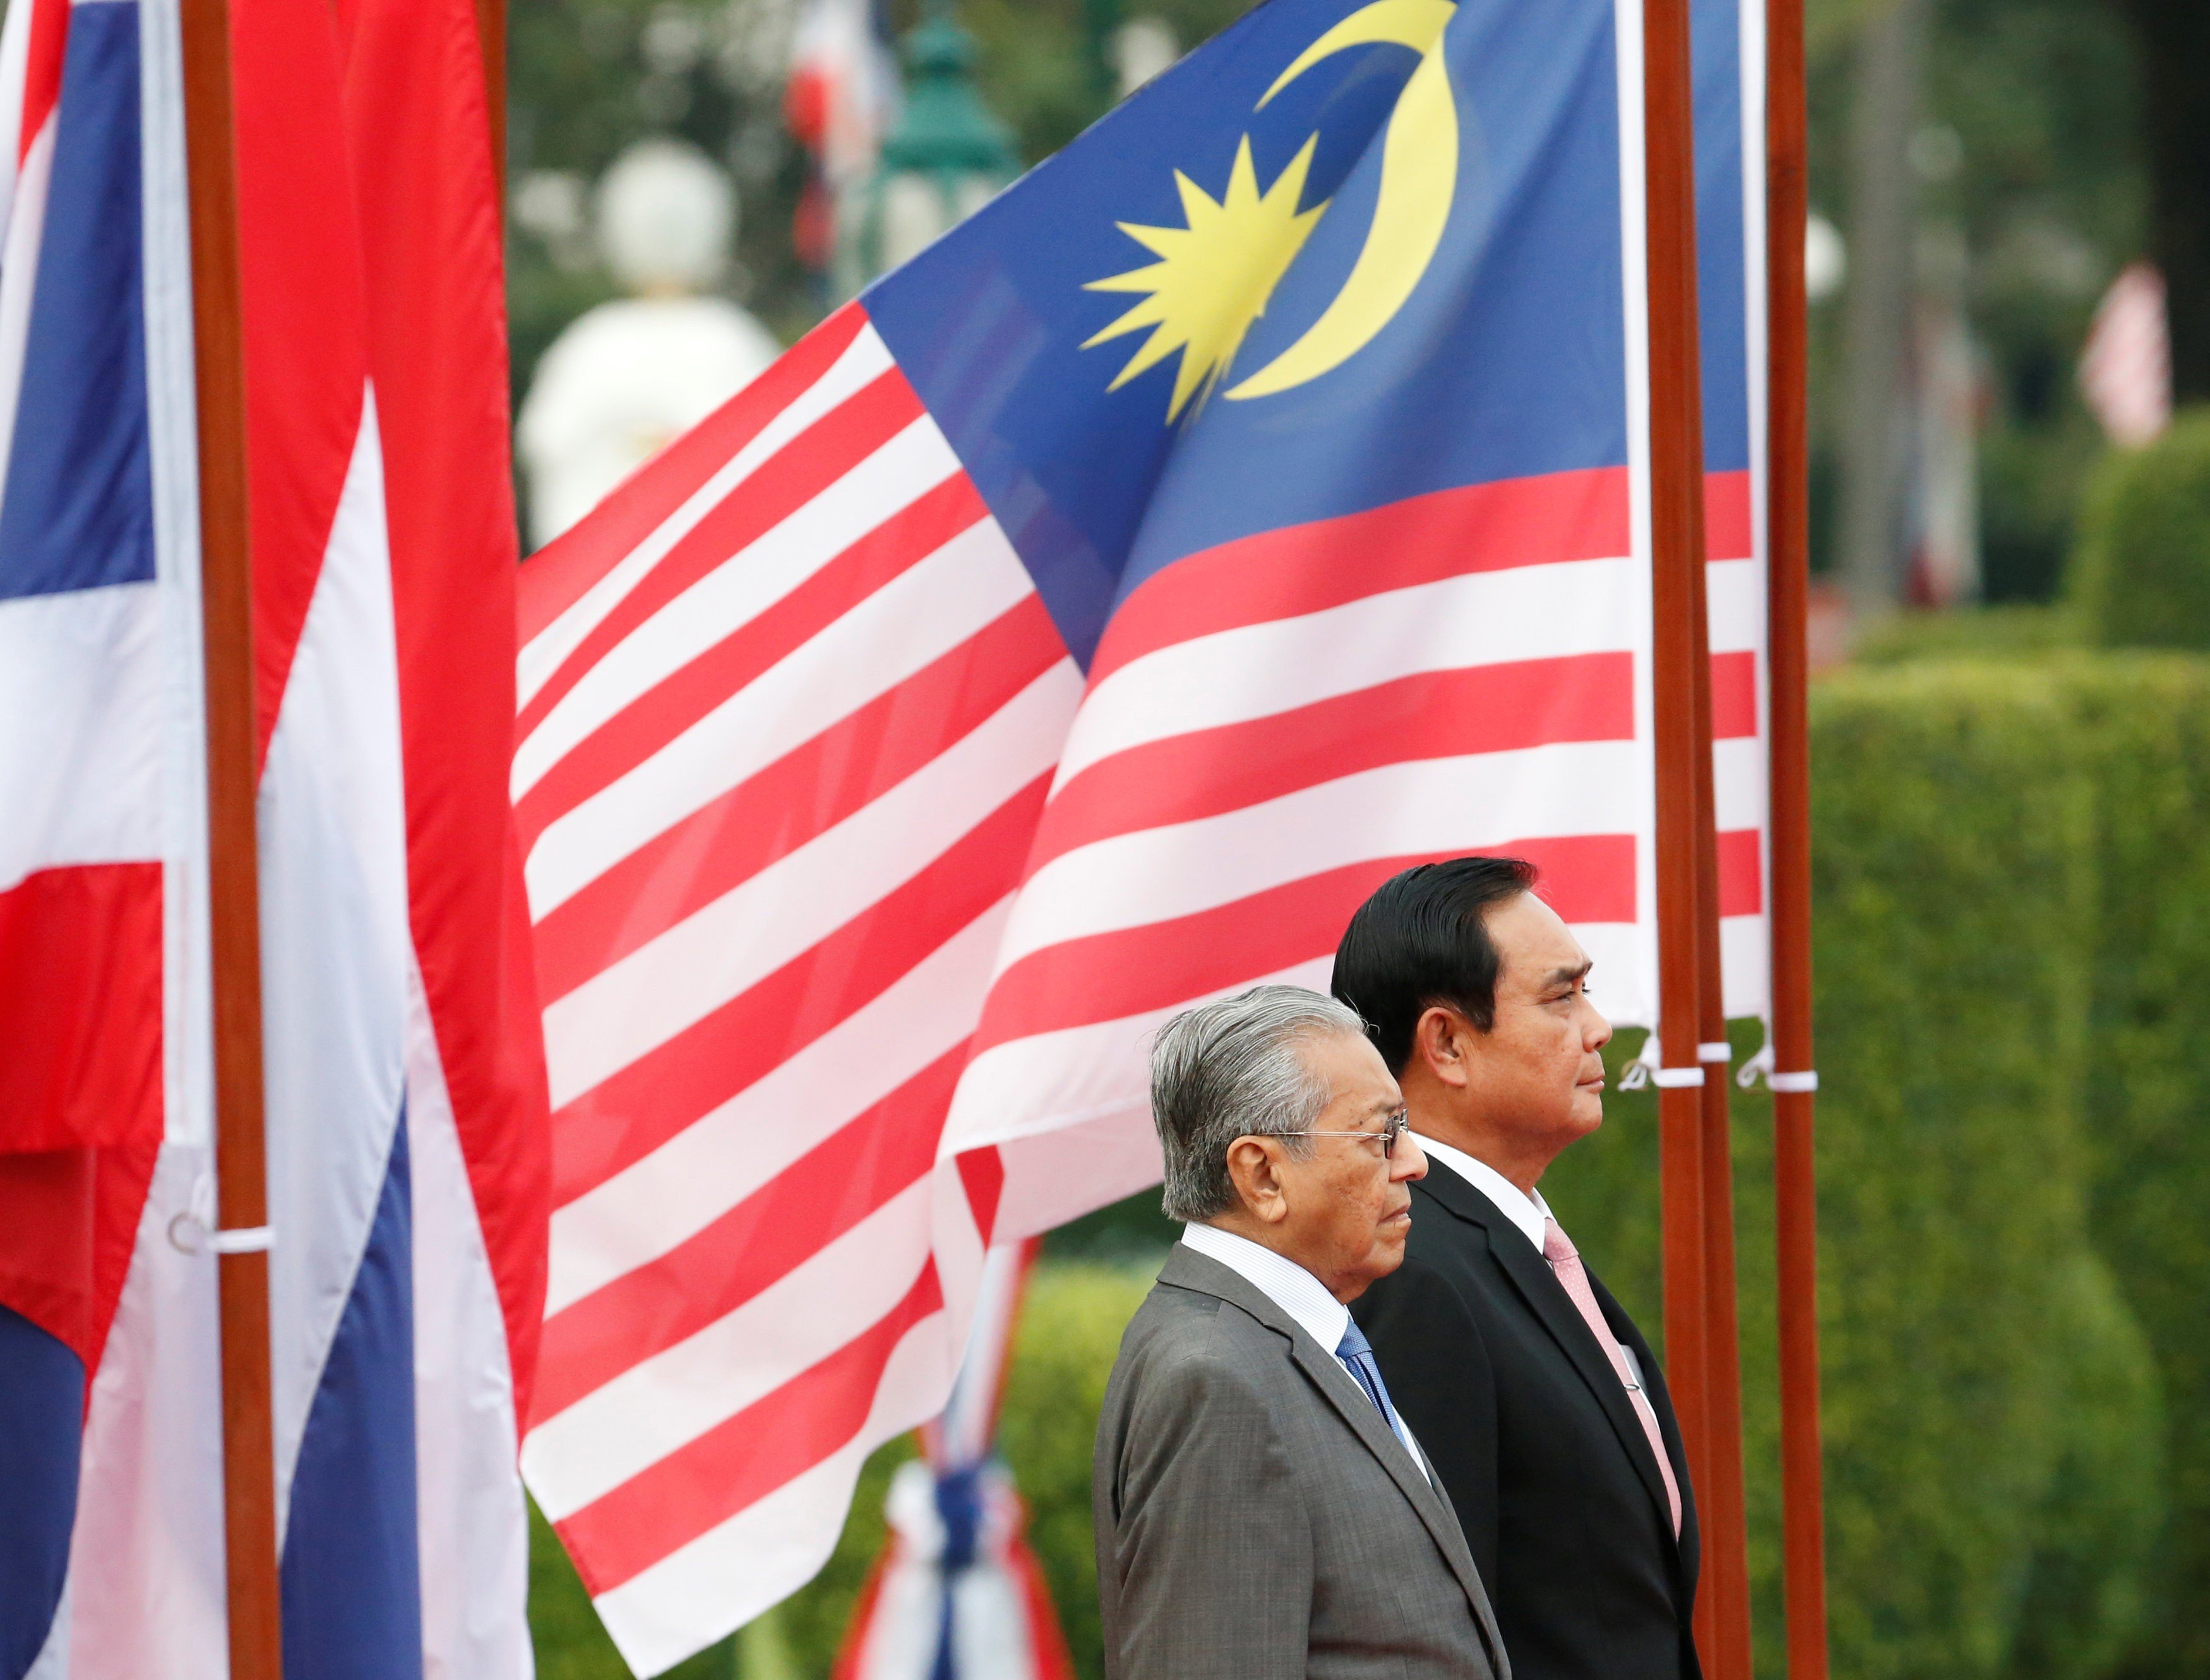 Malaysian Prime Minister Mahathir Mohamad and Thai Prime Minister Prayuth Chan-ocha. Photo: Reuters